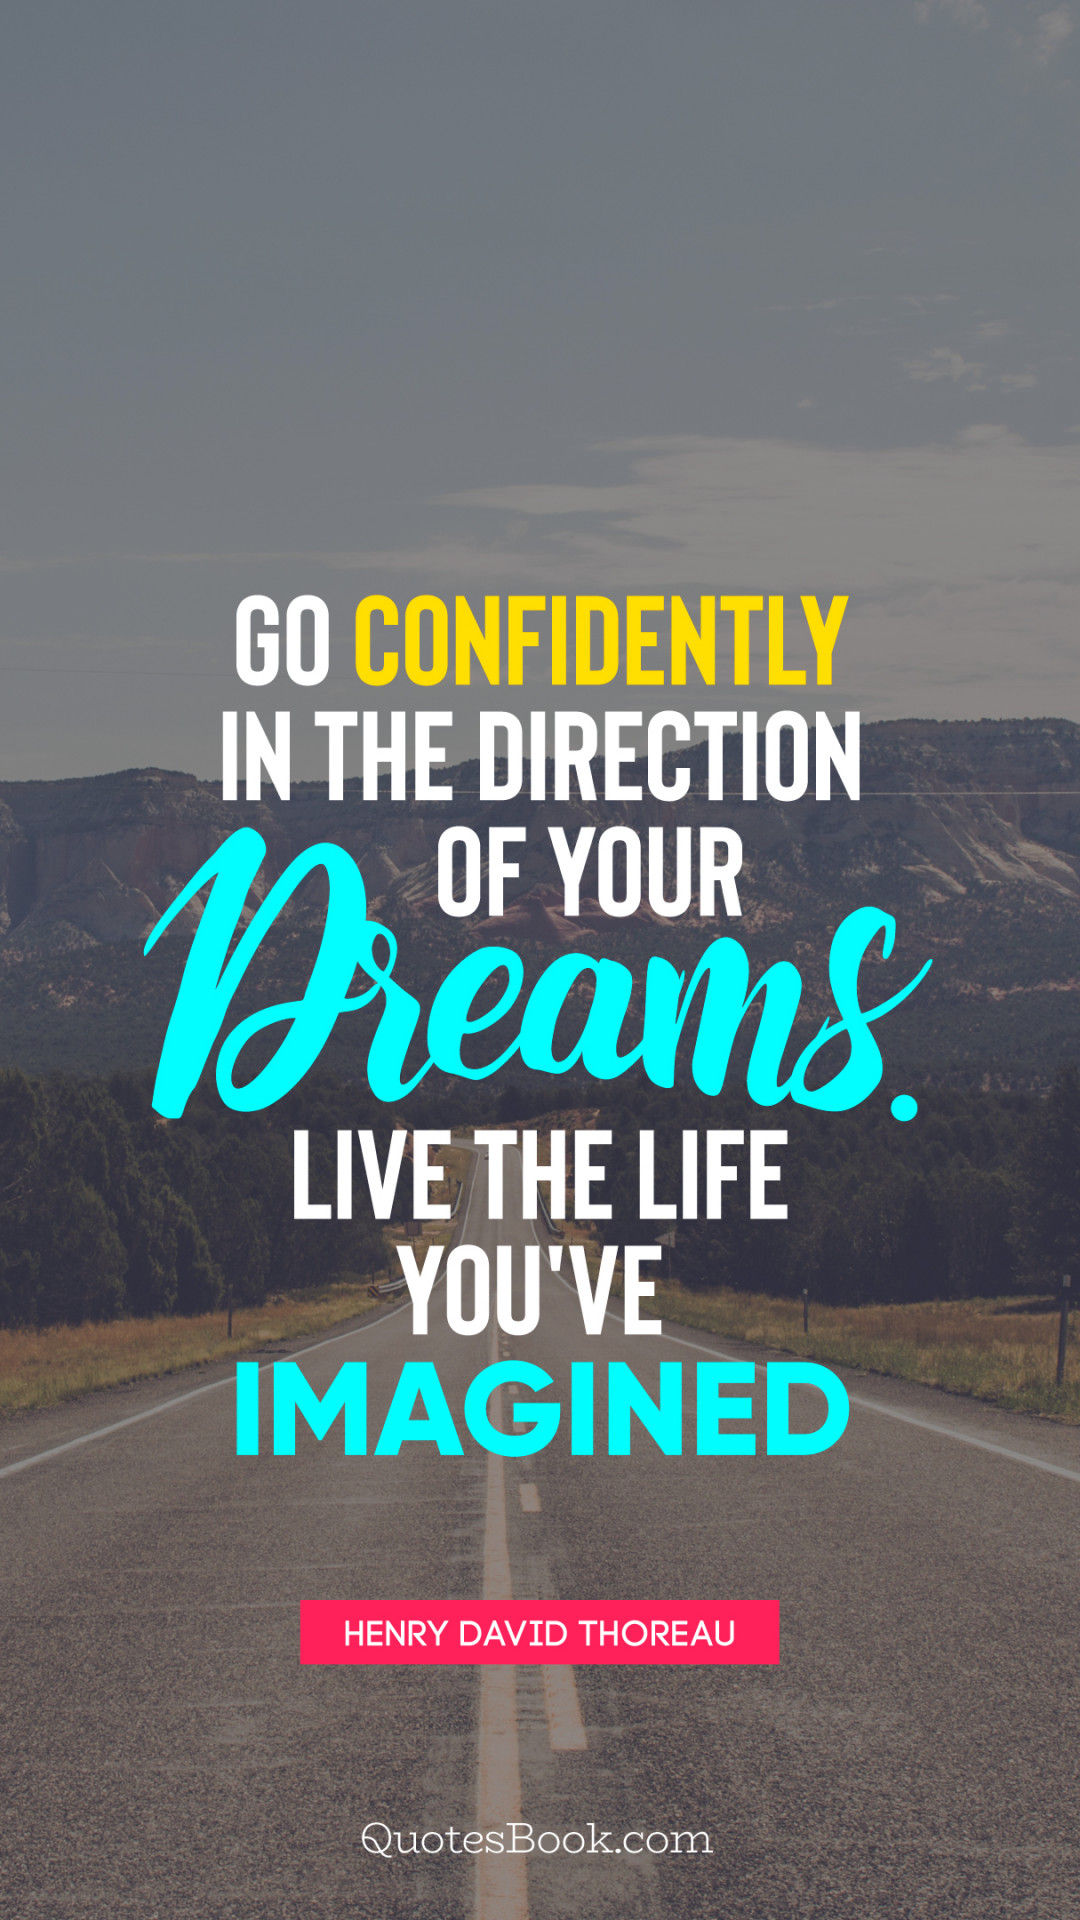 Go confidently in the direction of your dreams. Live the life you've